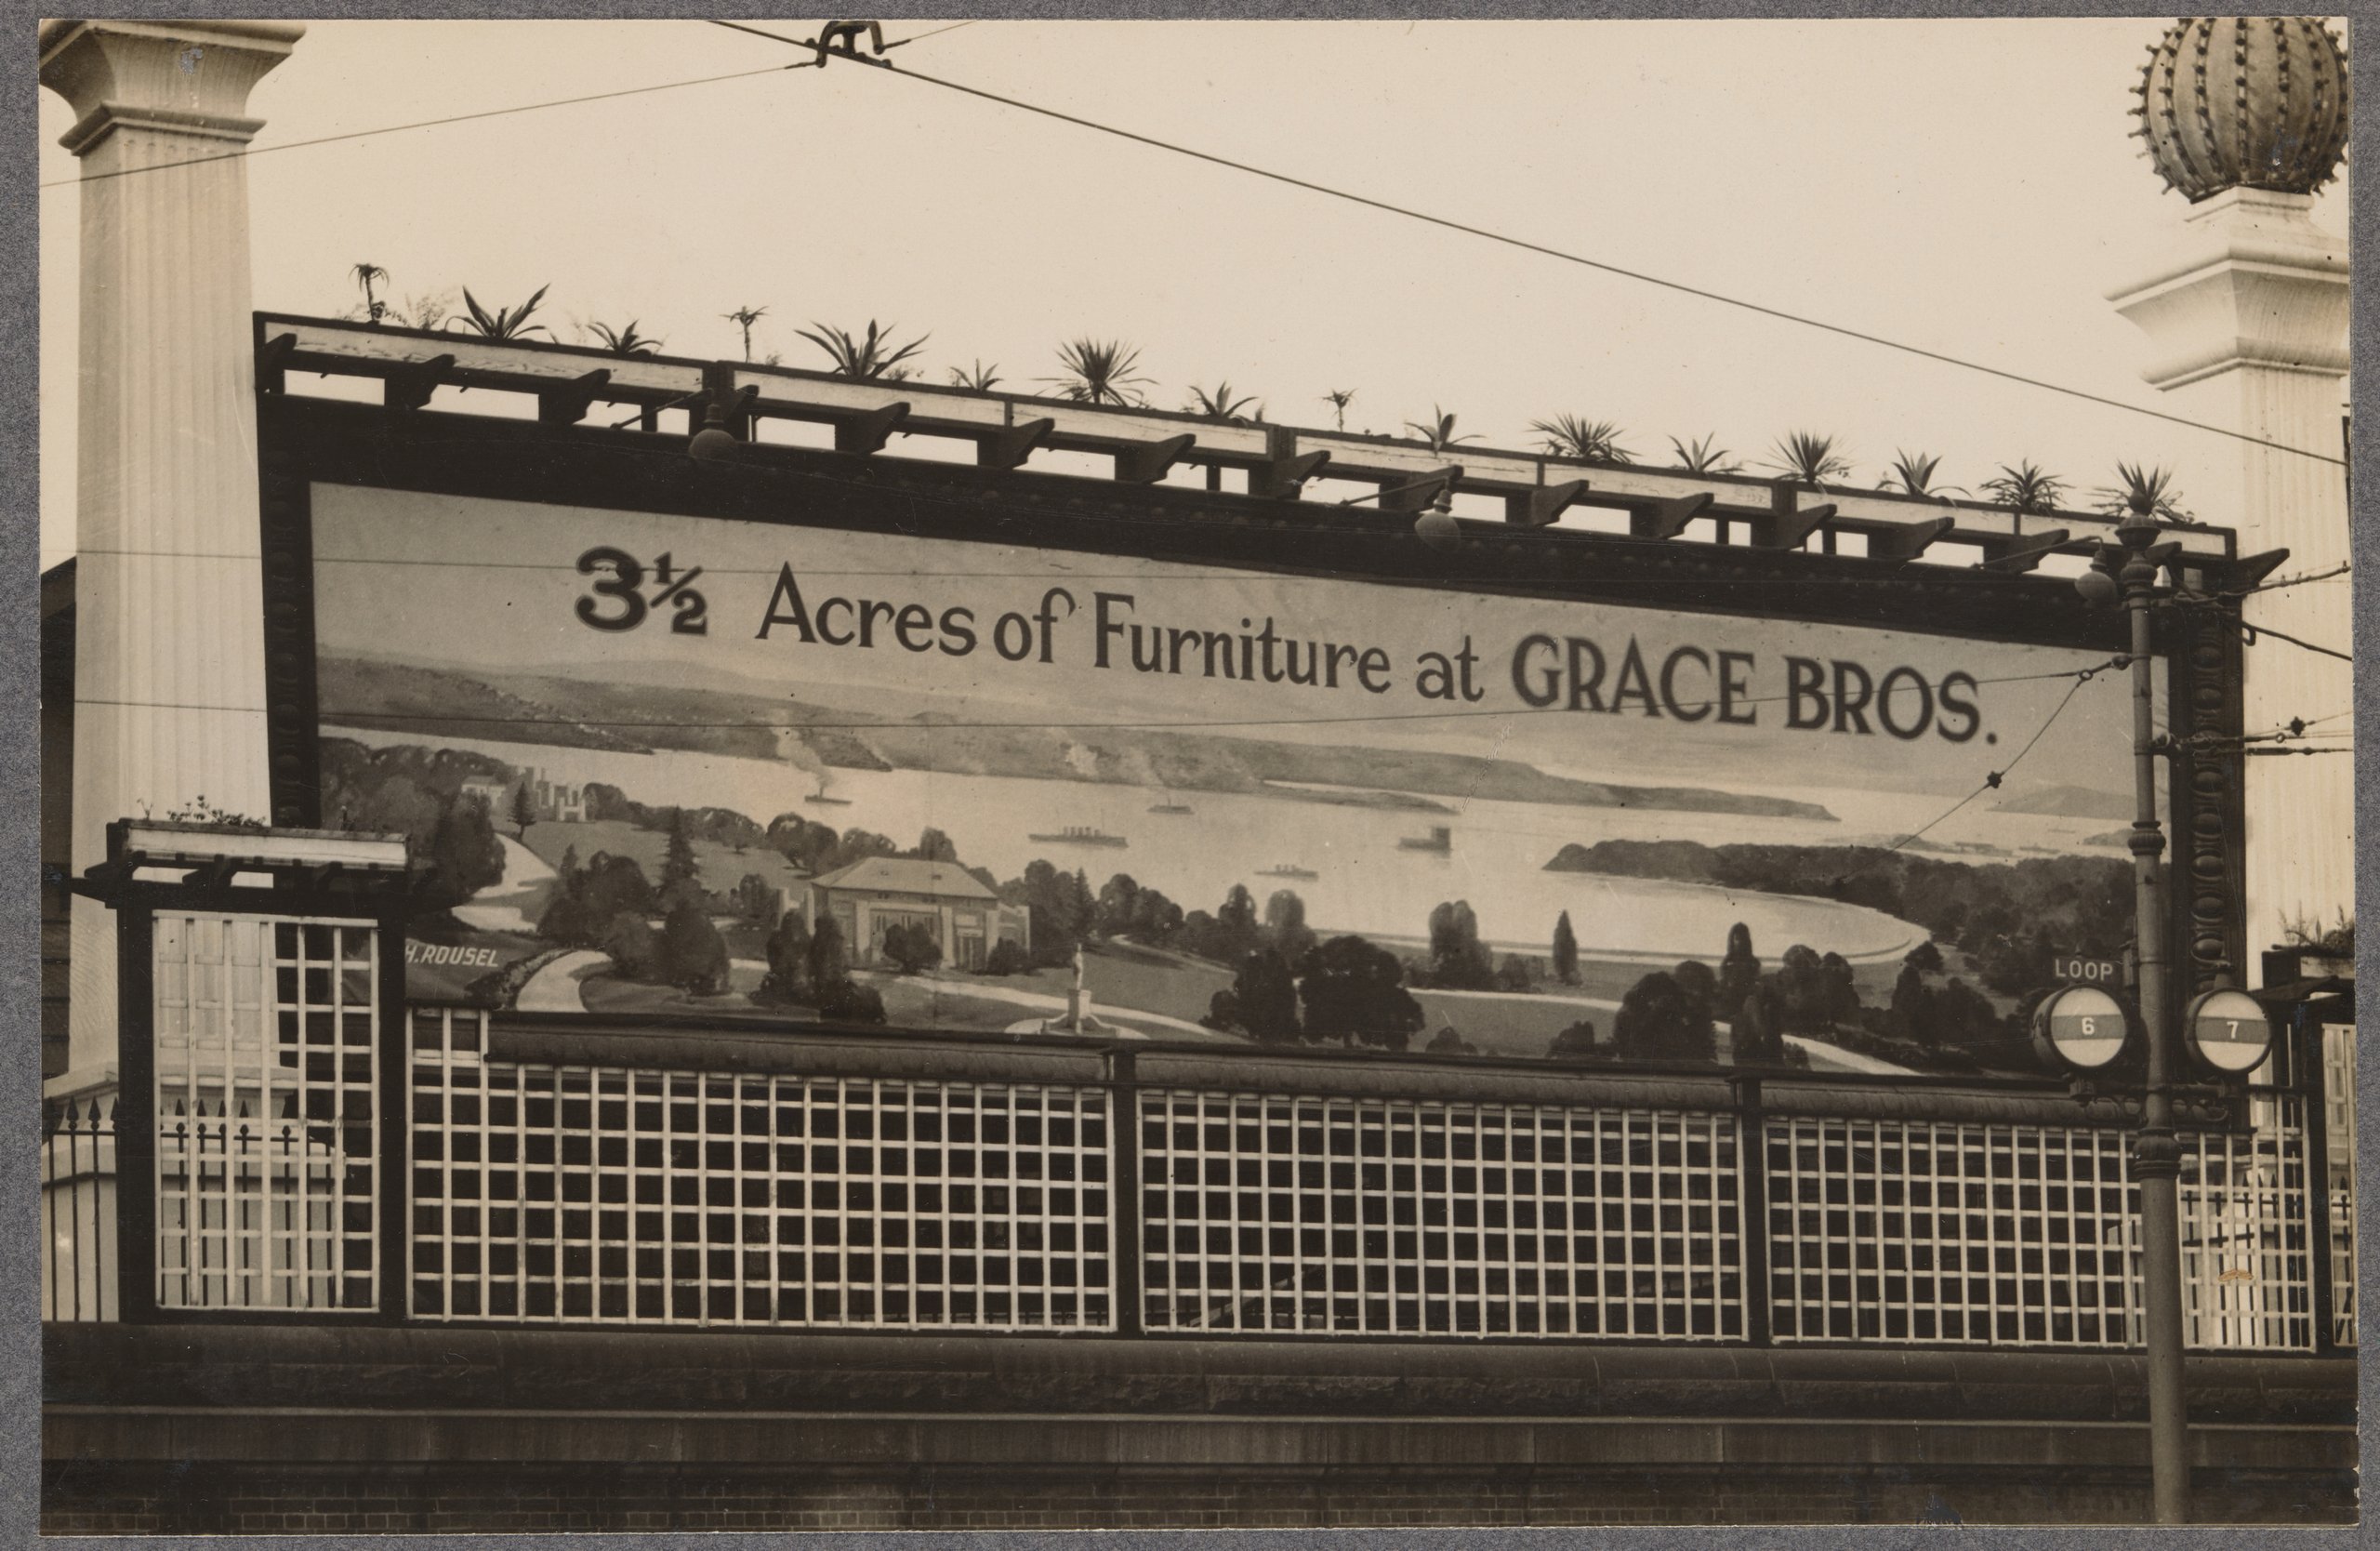 Photograph of advertising billboard for Grace Bros advertising furniture